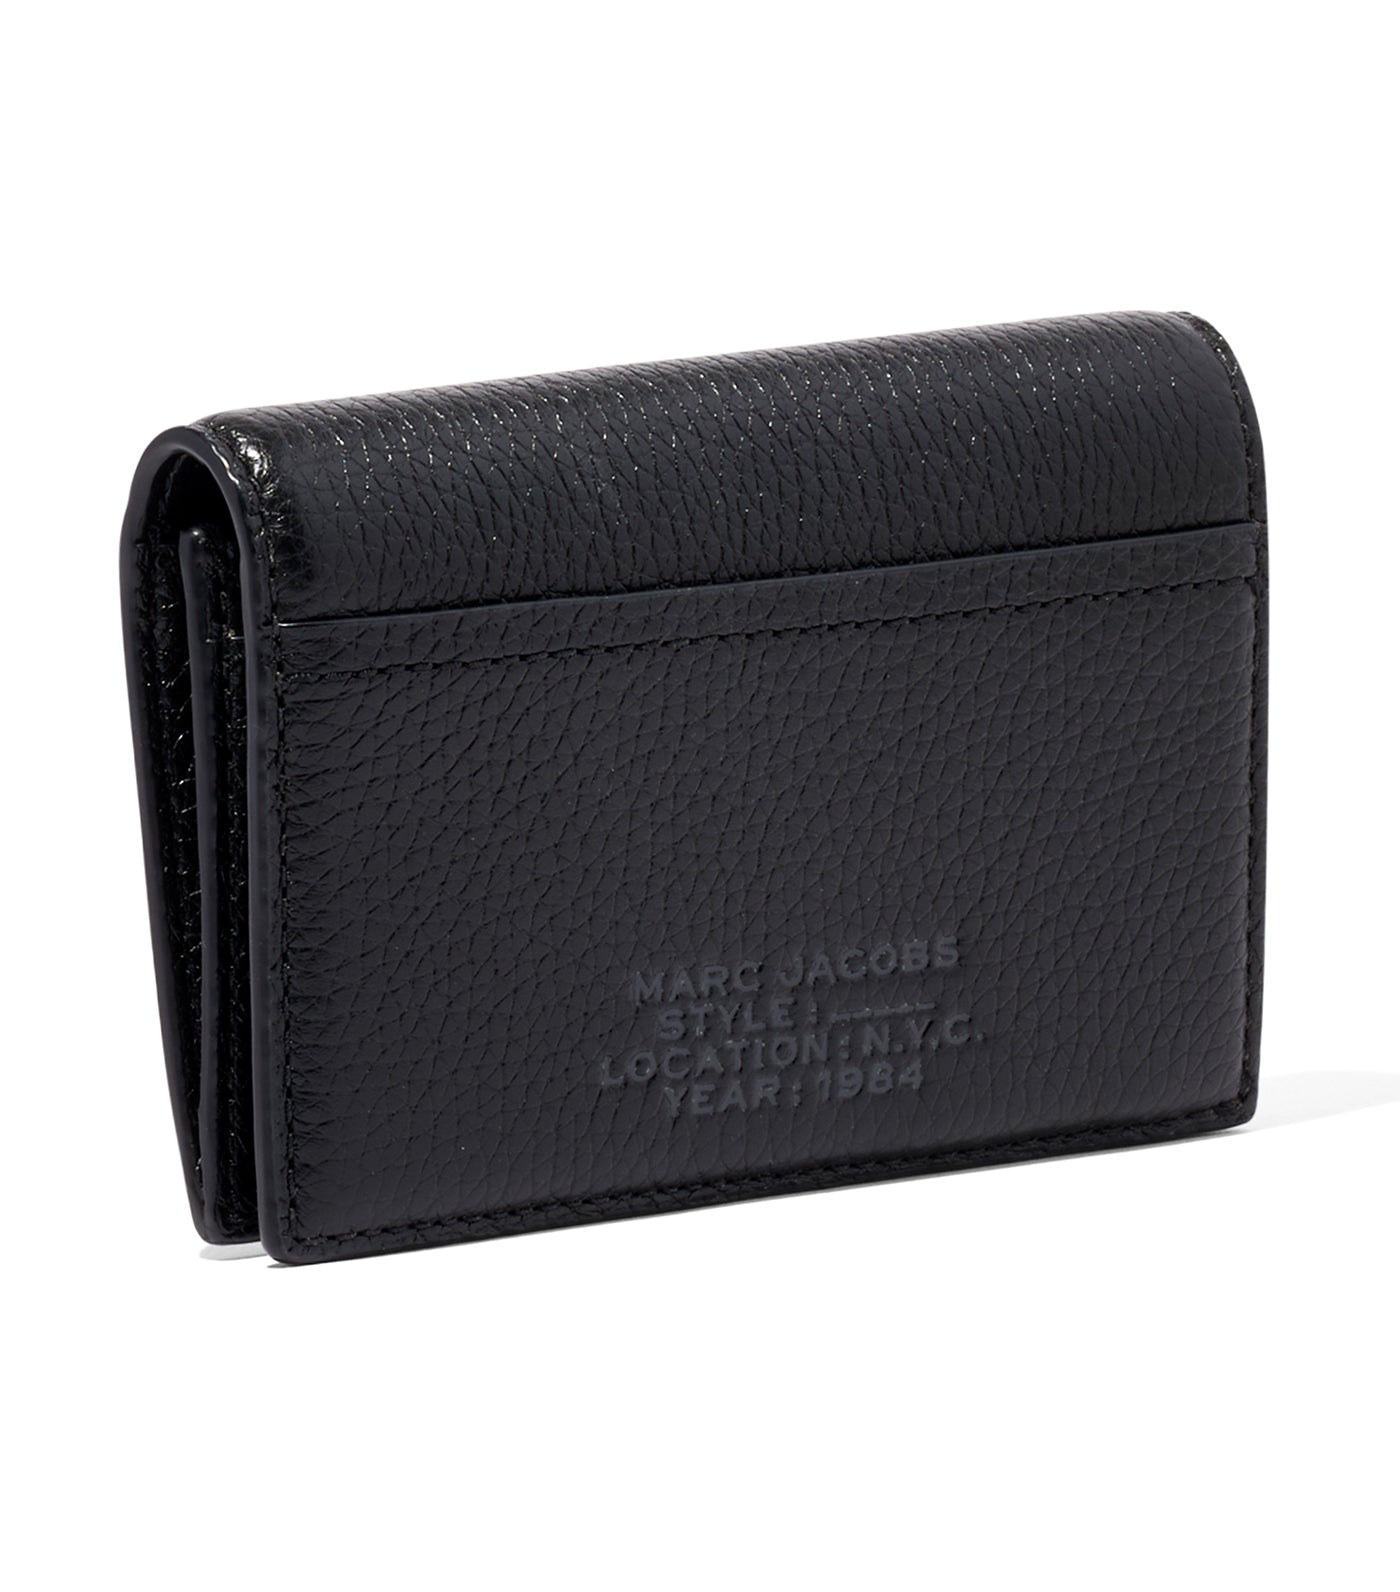 The Leather Small Bifold Wallet Black